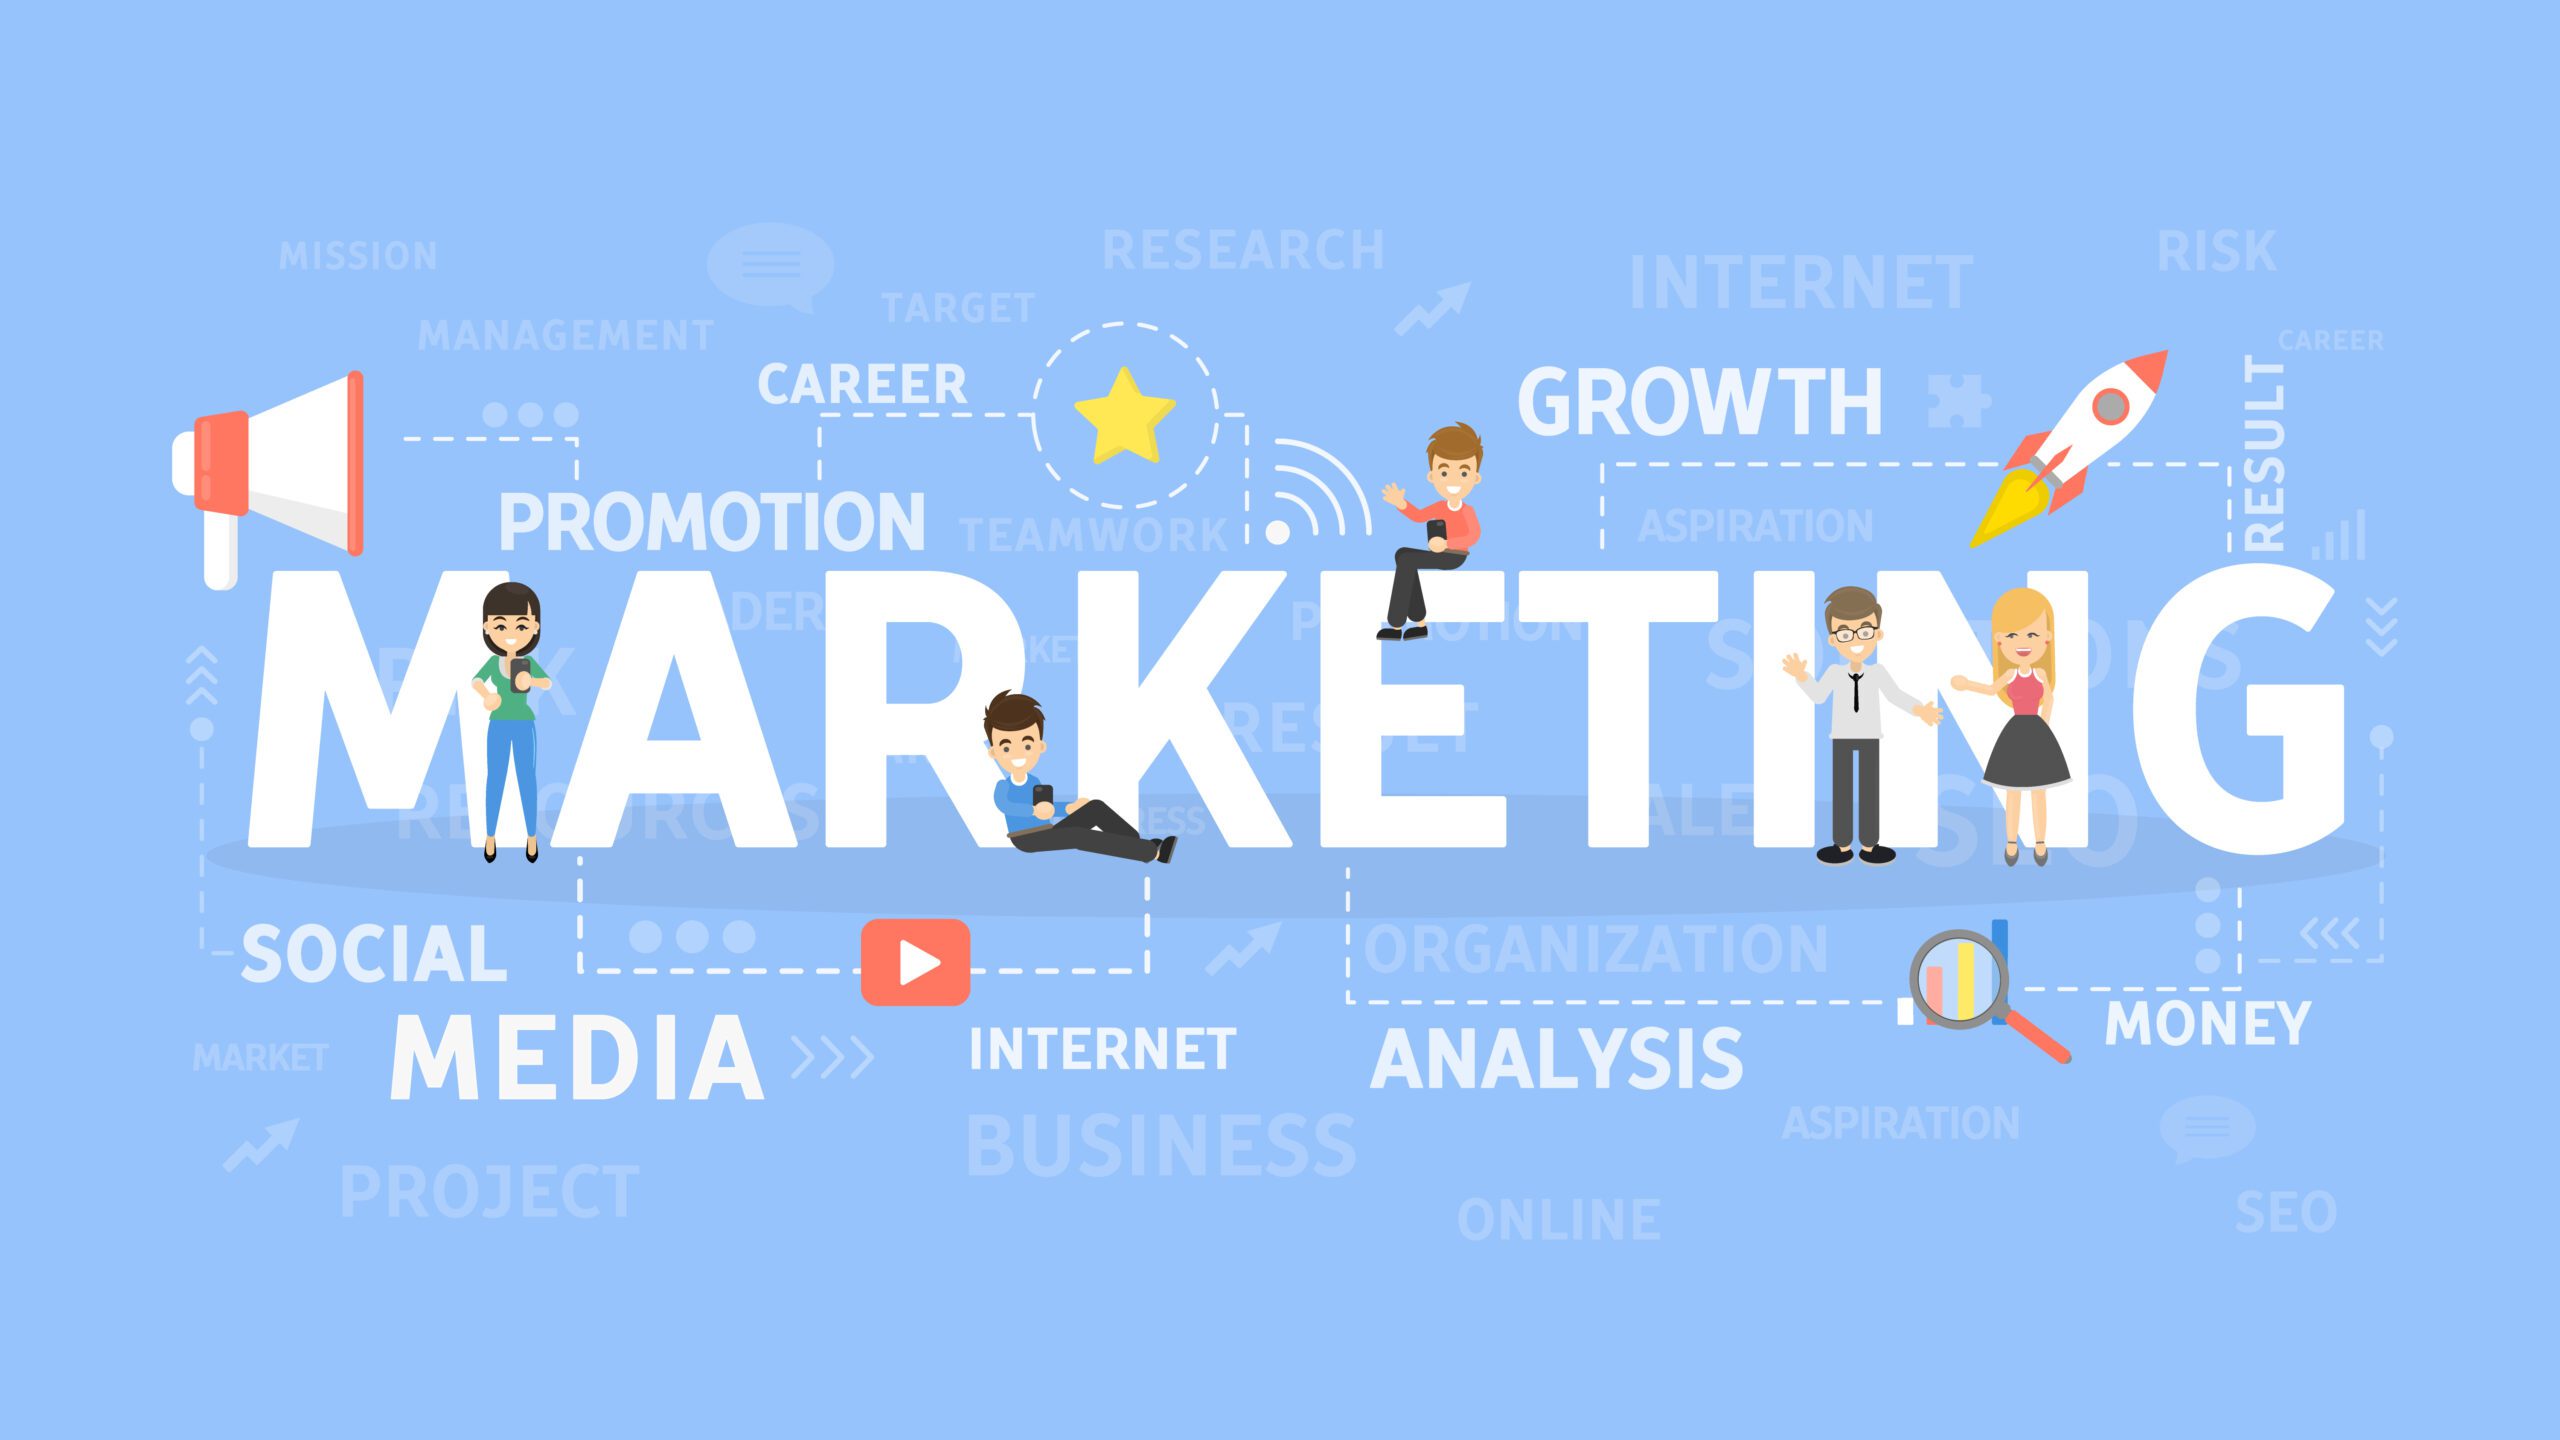 Combining Media and Online Marketing